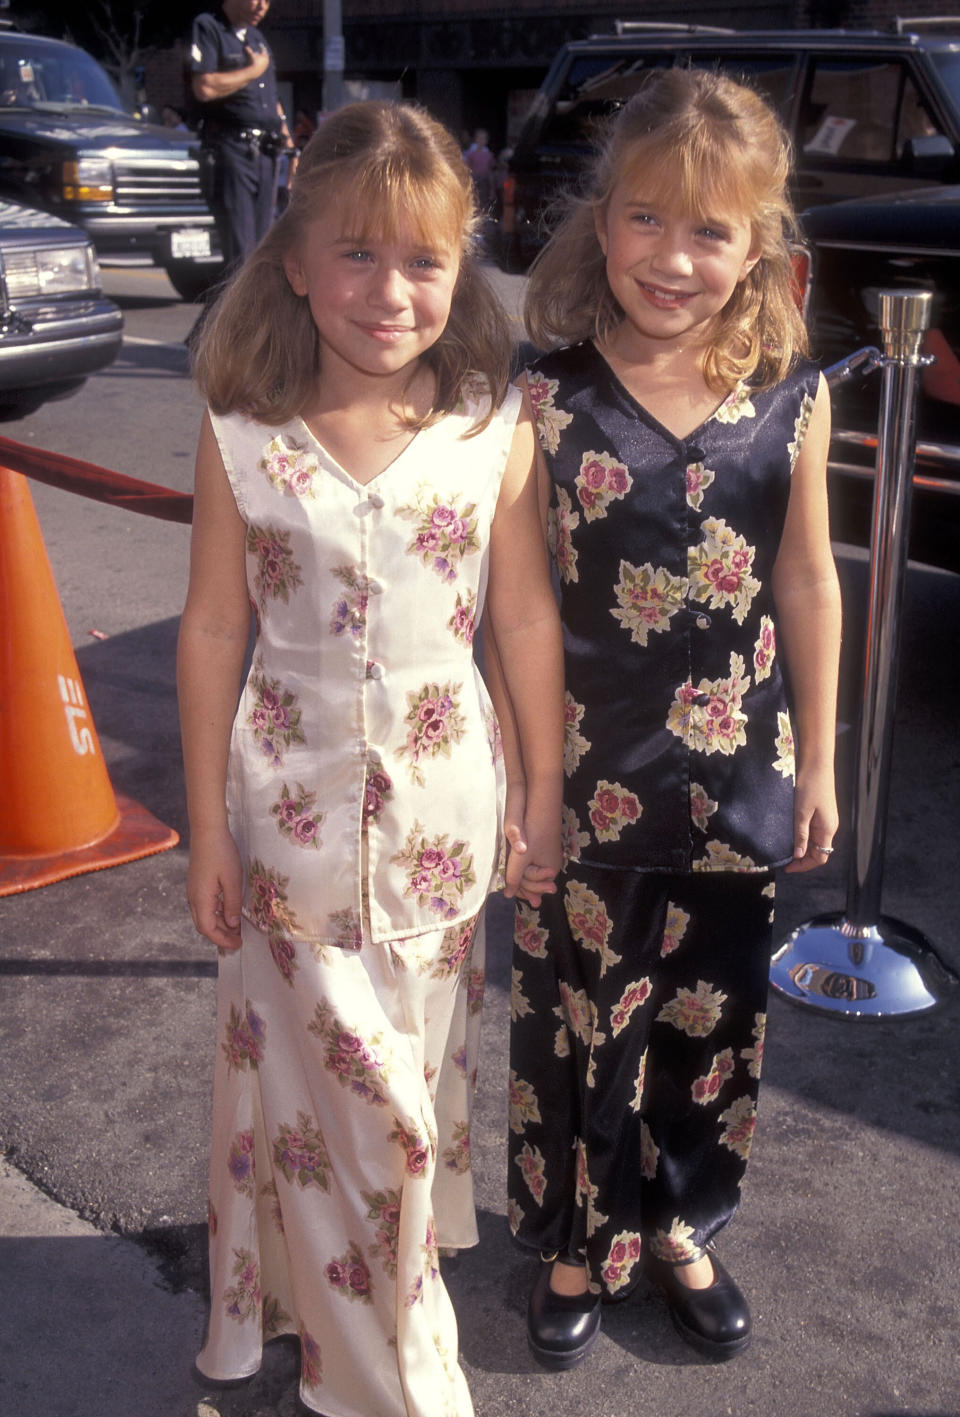 The twins attend the "It Takes Two" premiere at the Mann National Theatre in Westwood, California.